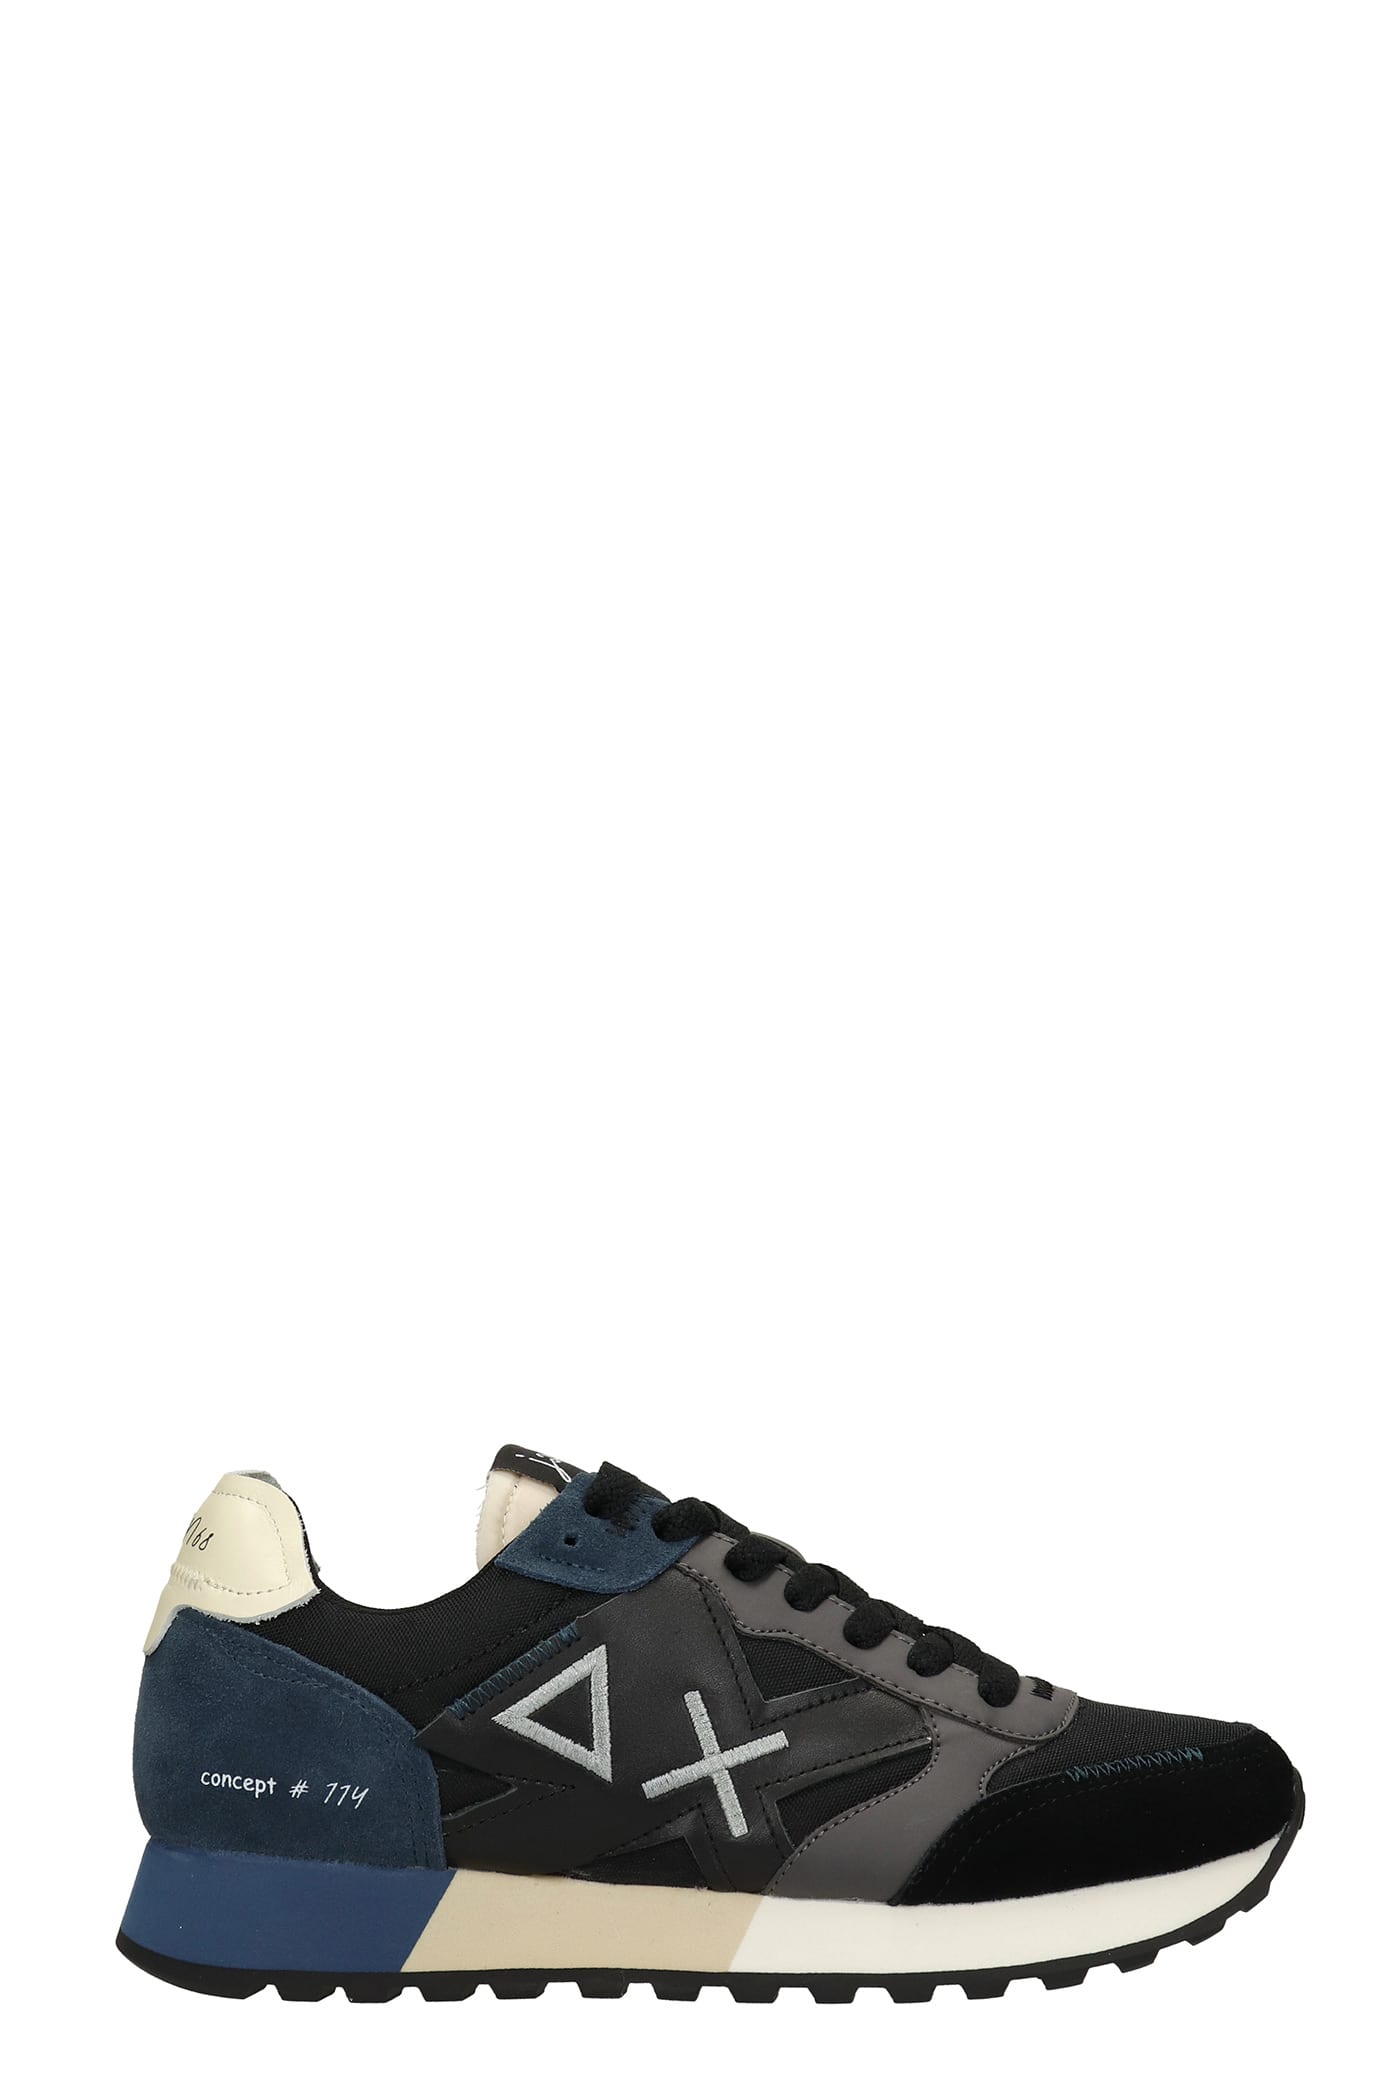 Sun 68 Uncle Jaki Sneakers In Black Suede And Fabric